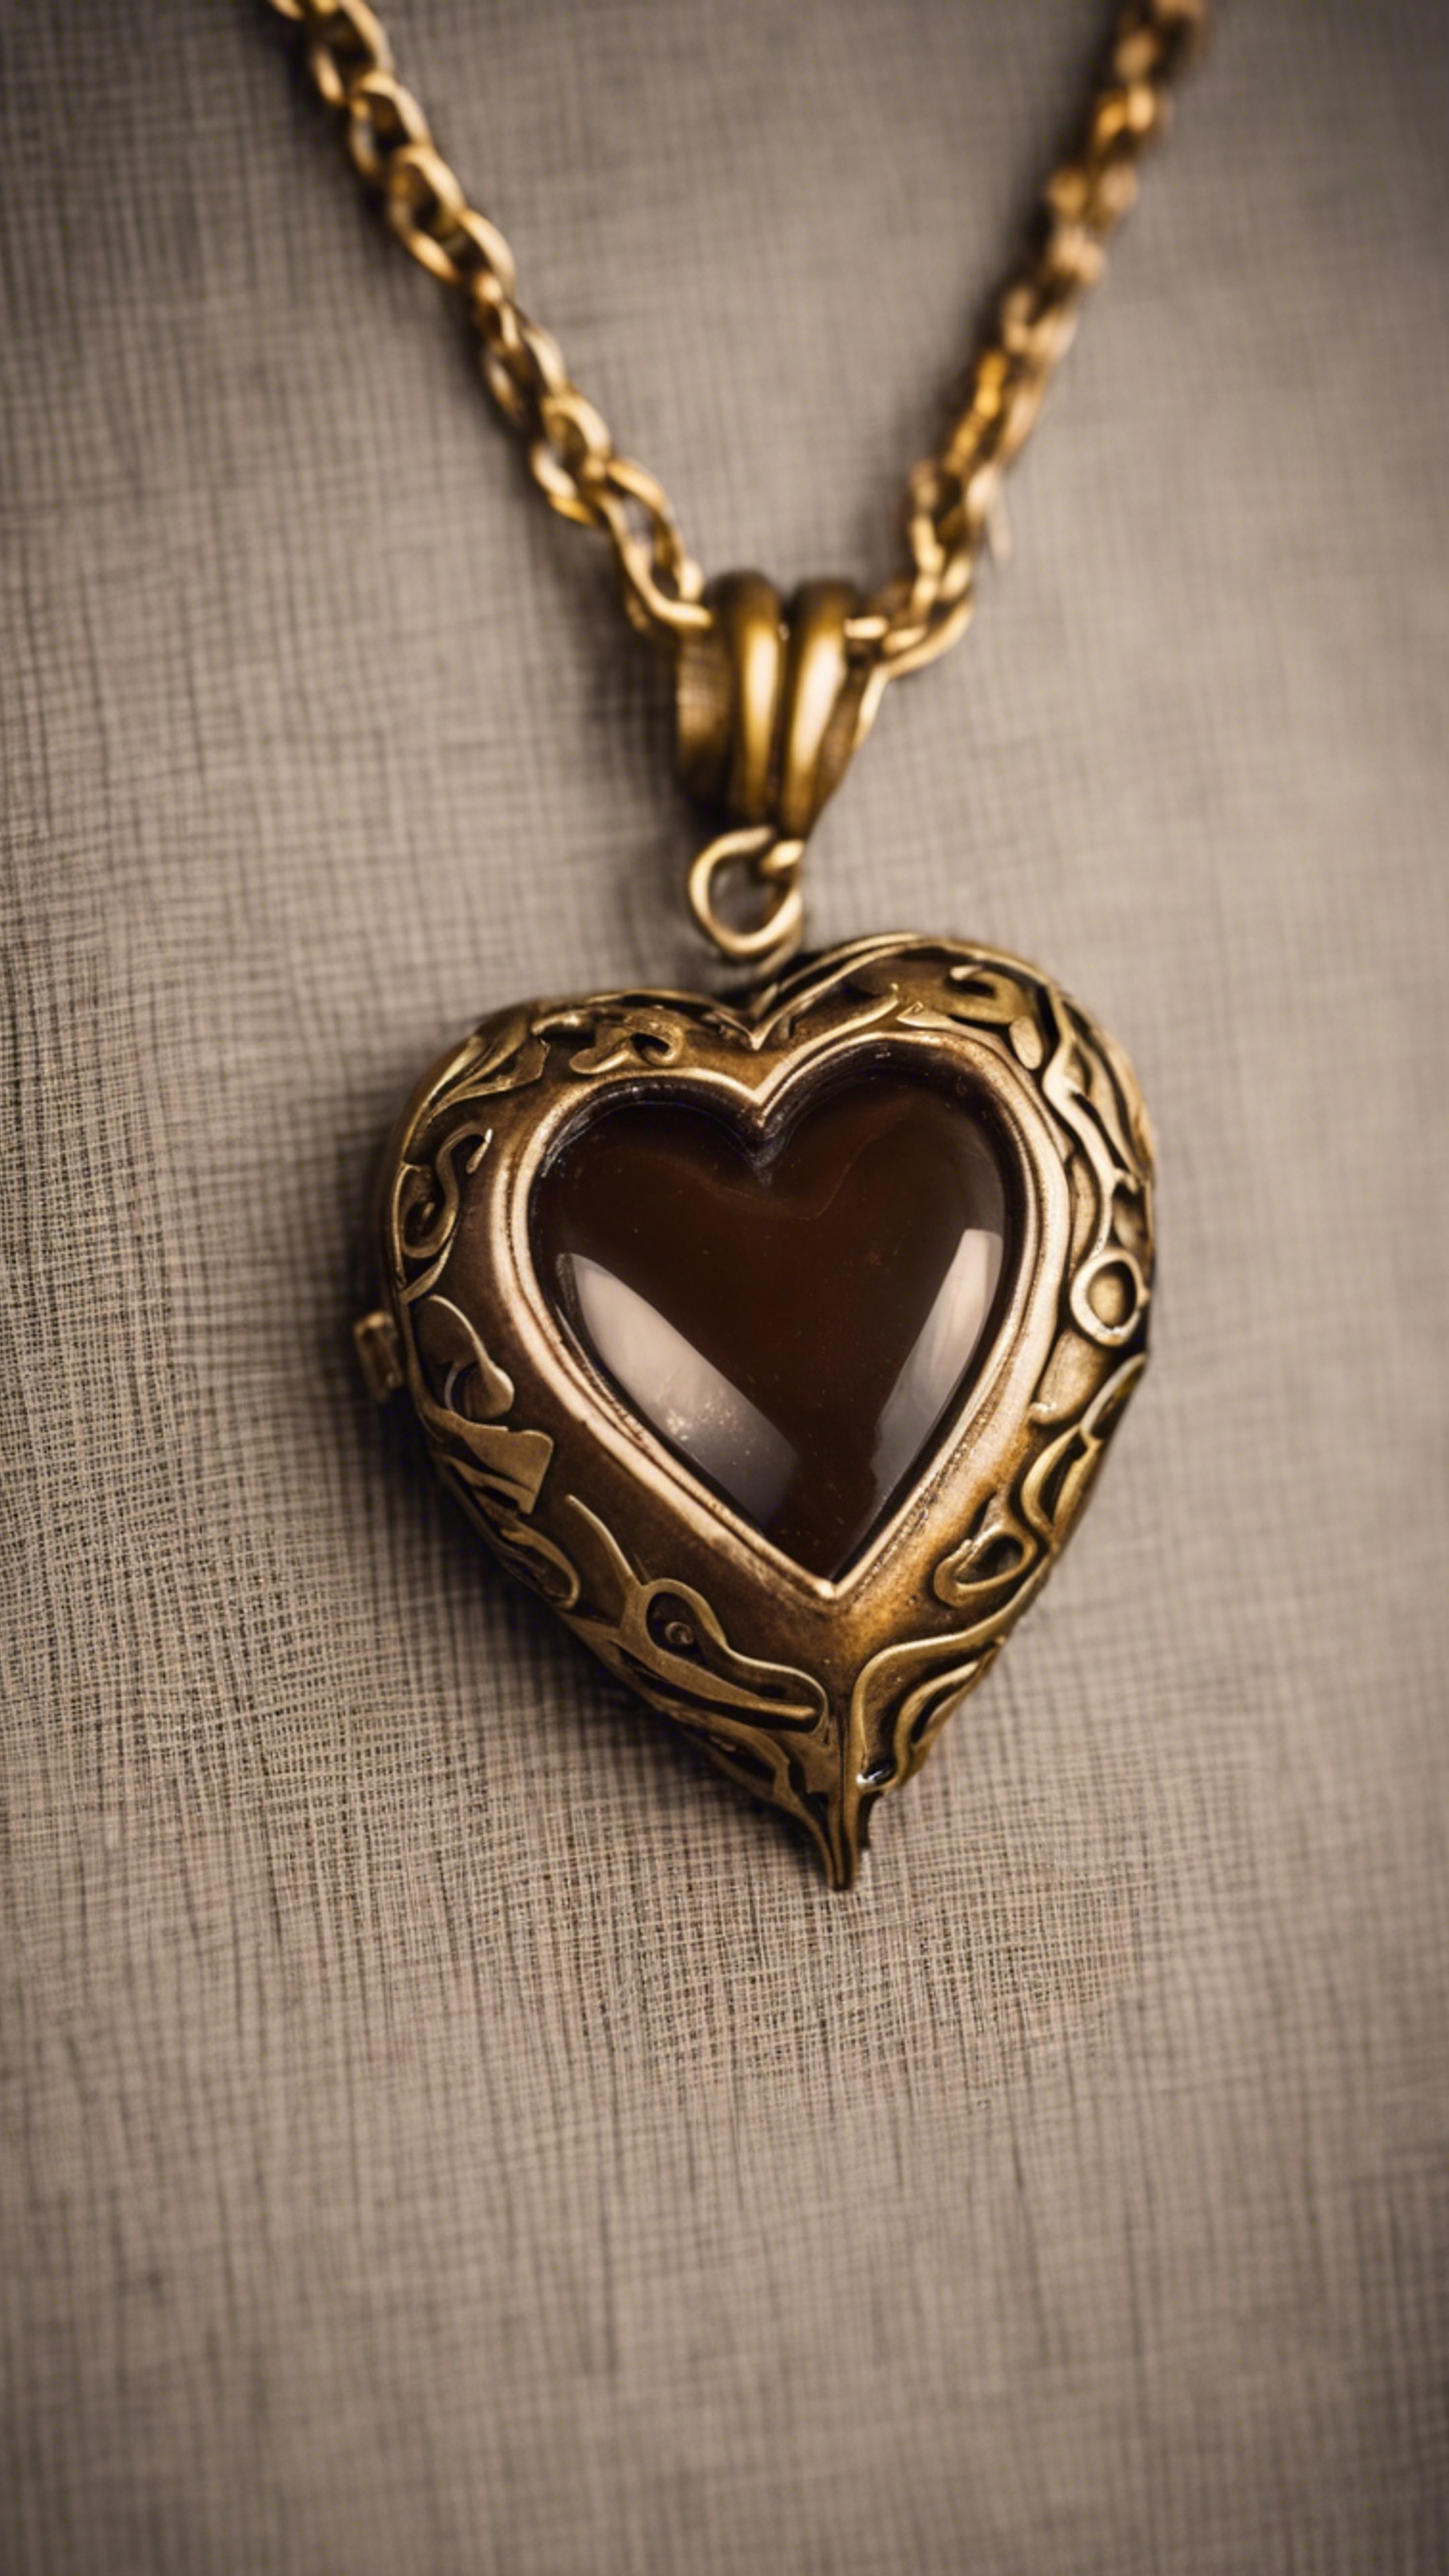 A shiny, brown, heart-shaped pendant on an antique gold chain.壁紙[3badafb810644137ab9f]